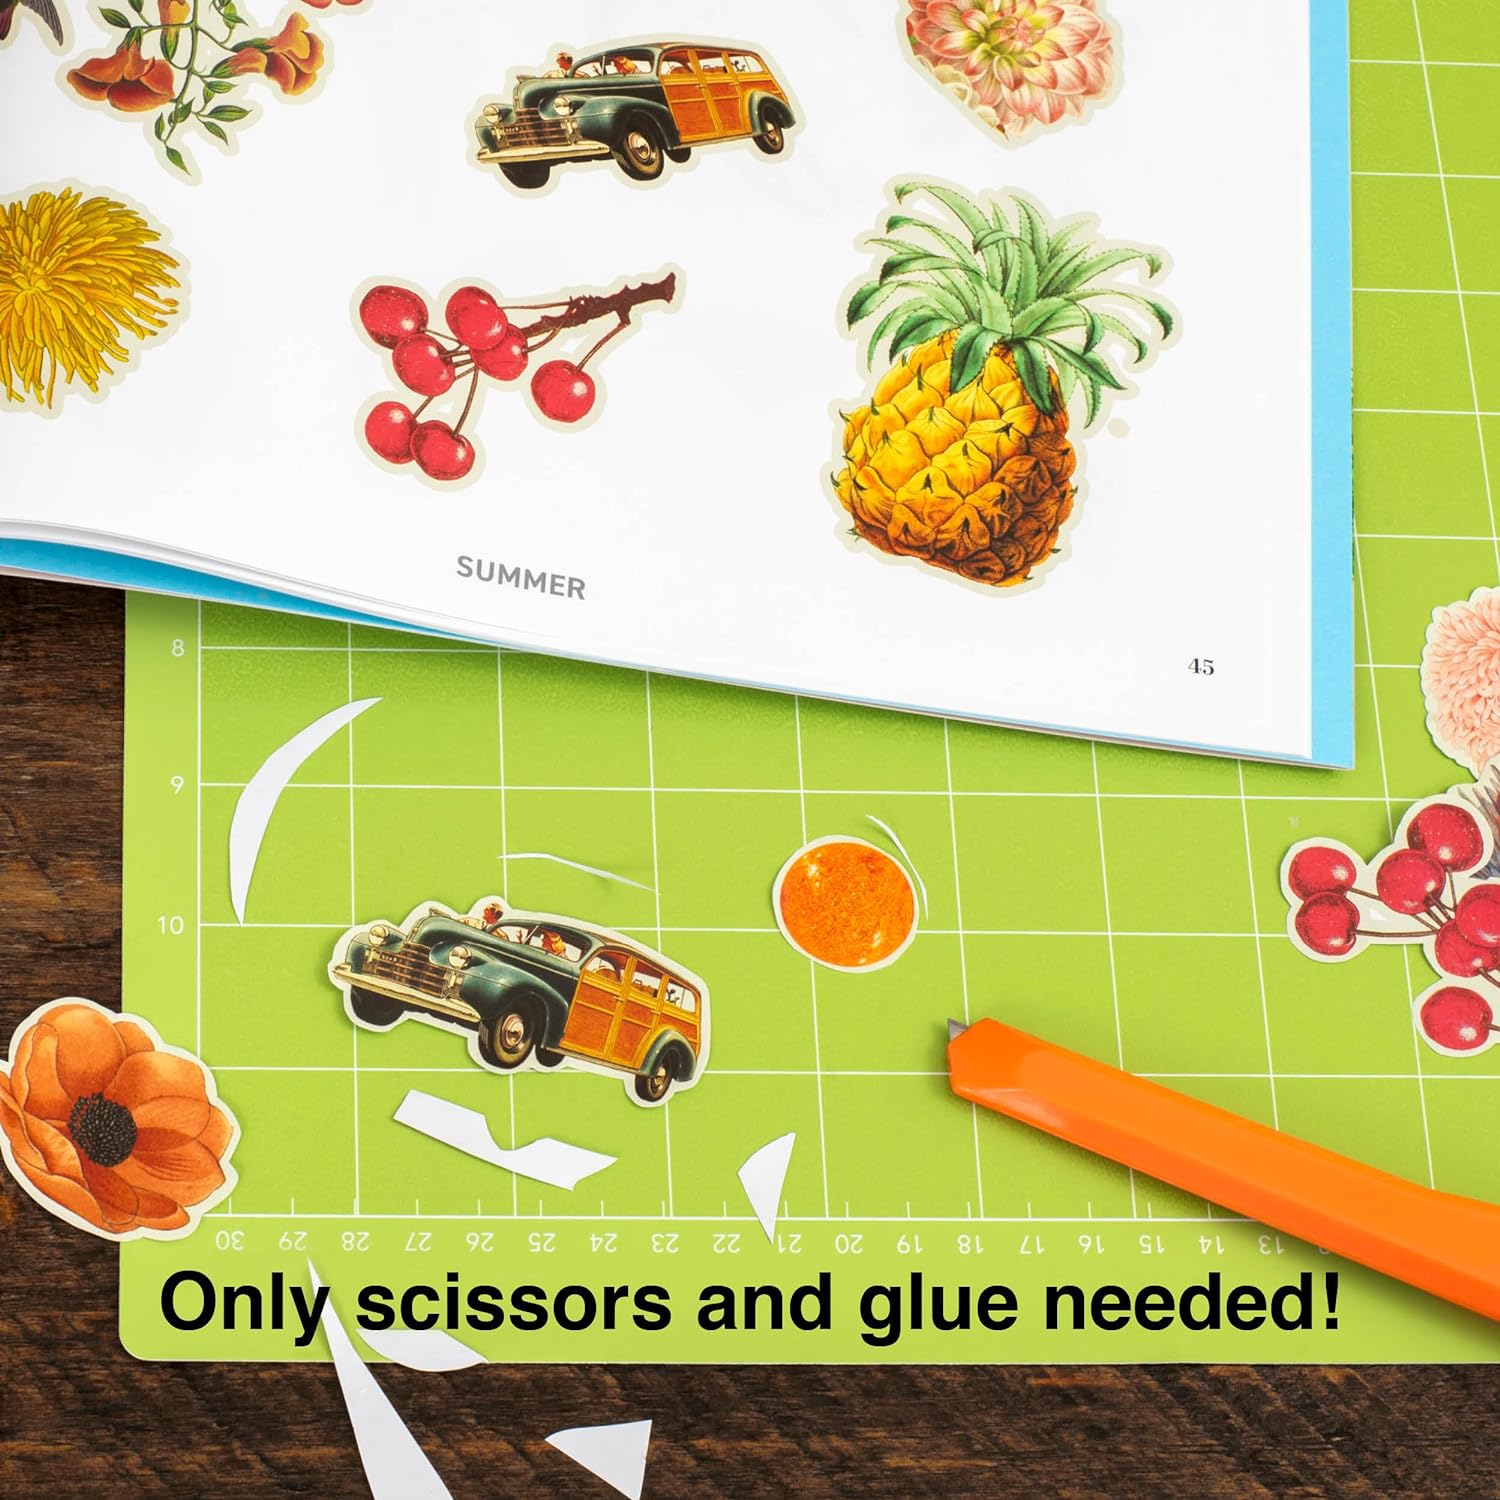 Four Seasons : Create Four Elegant Collages with the Images in this Surprising Kit